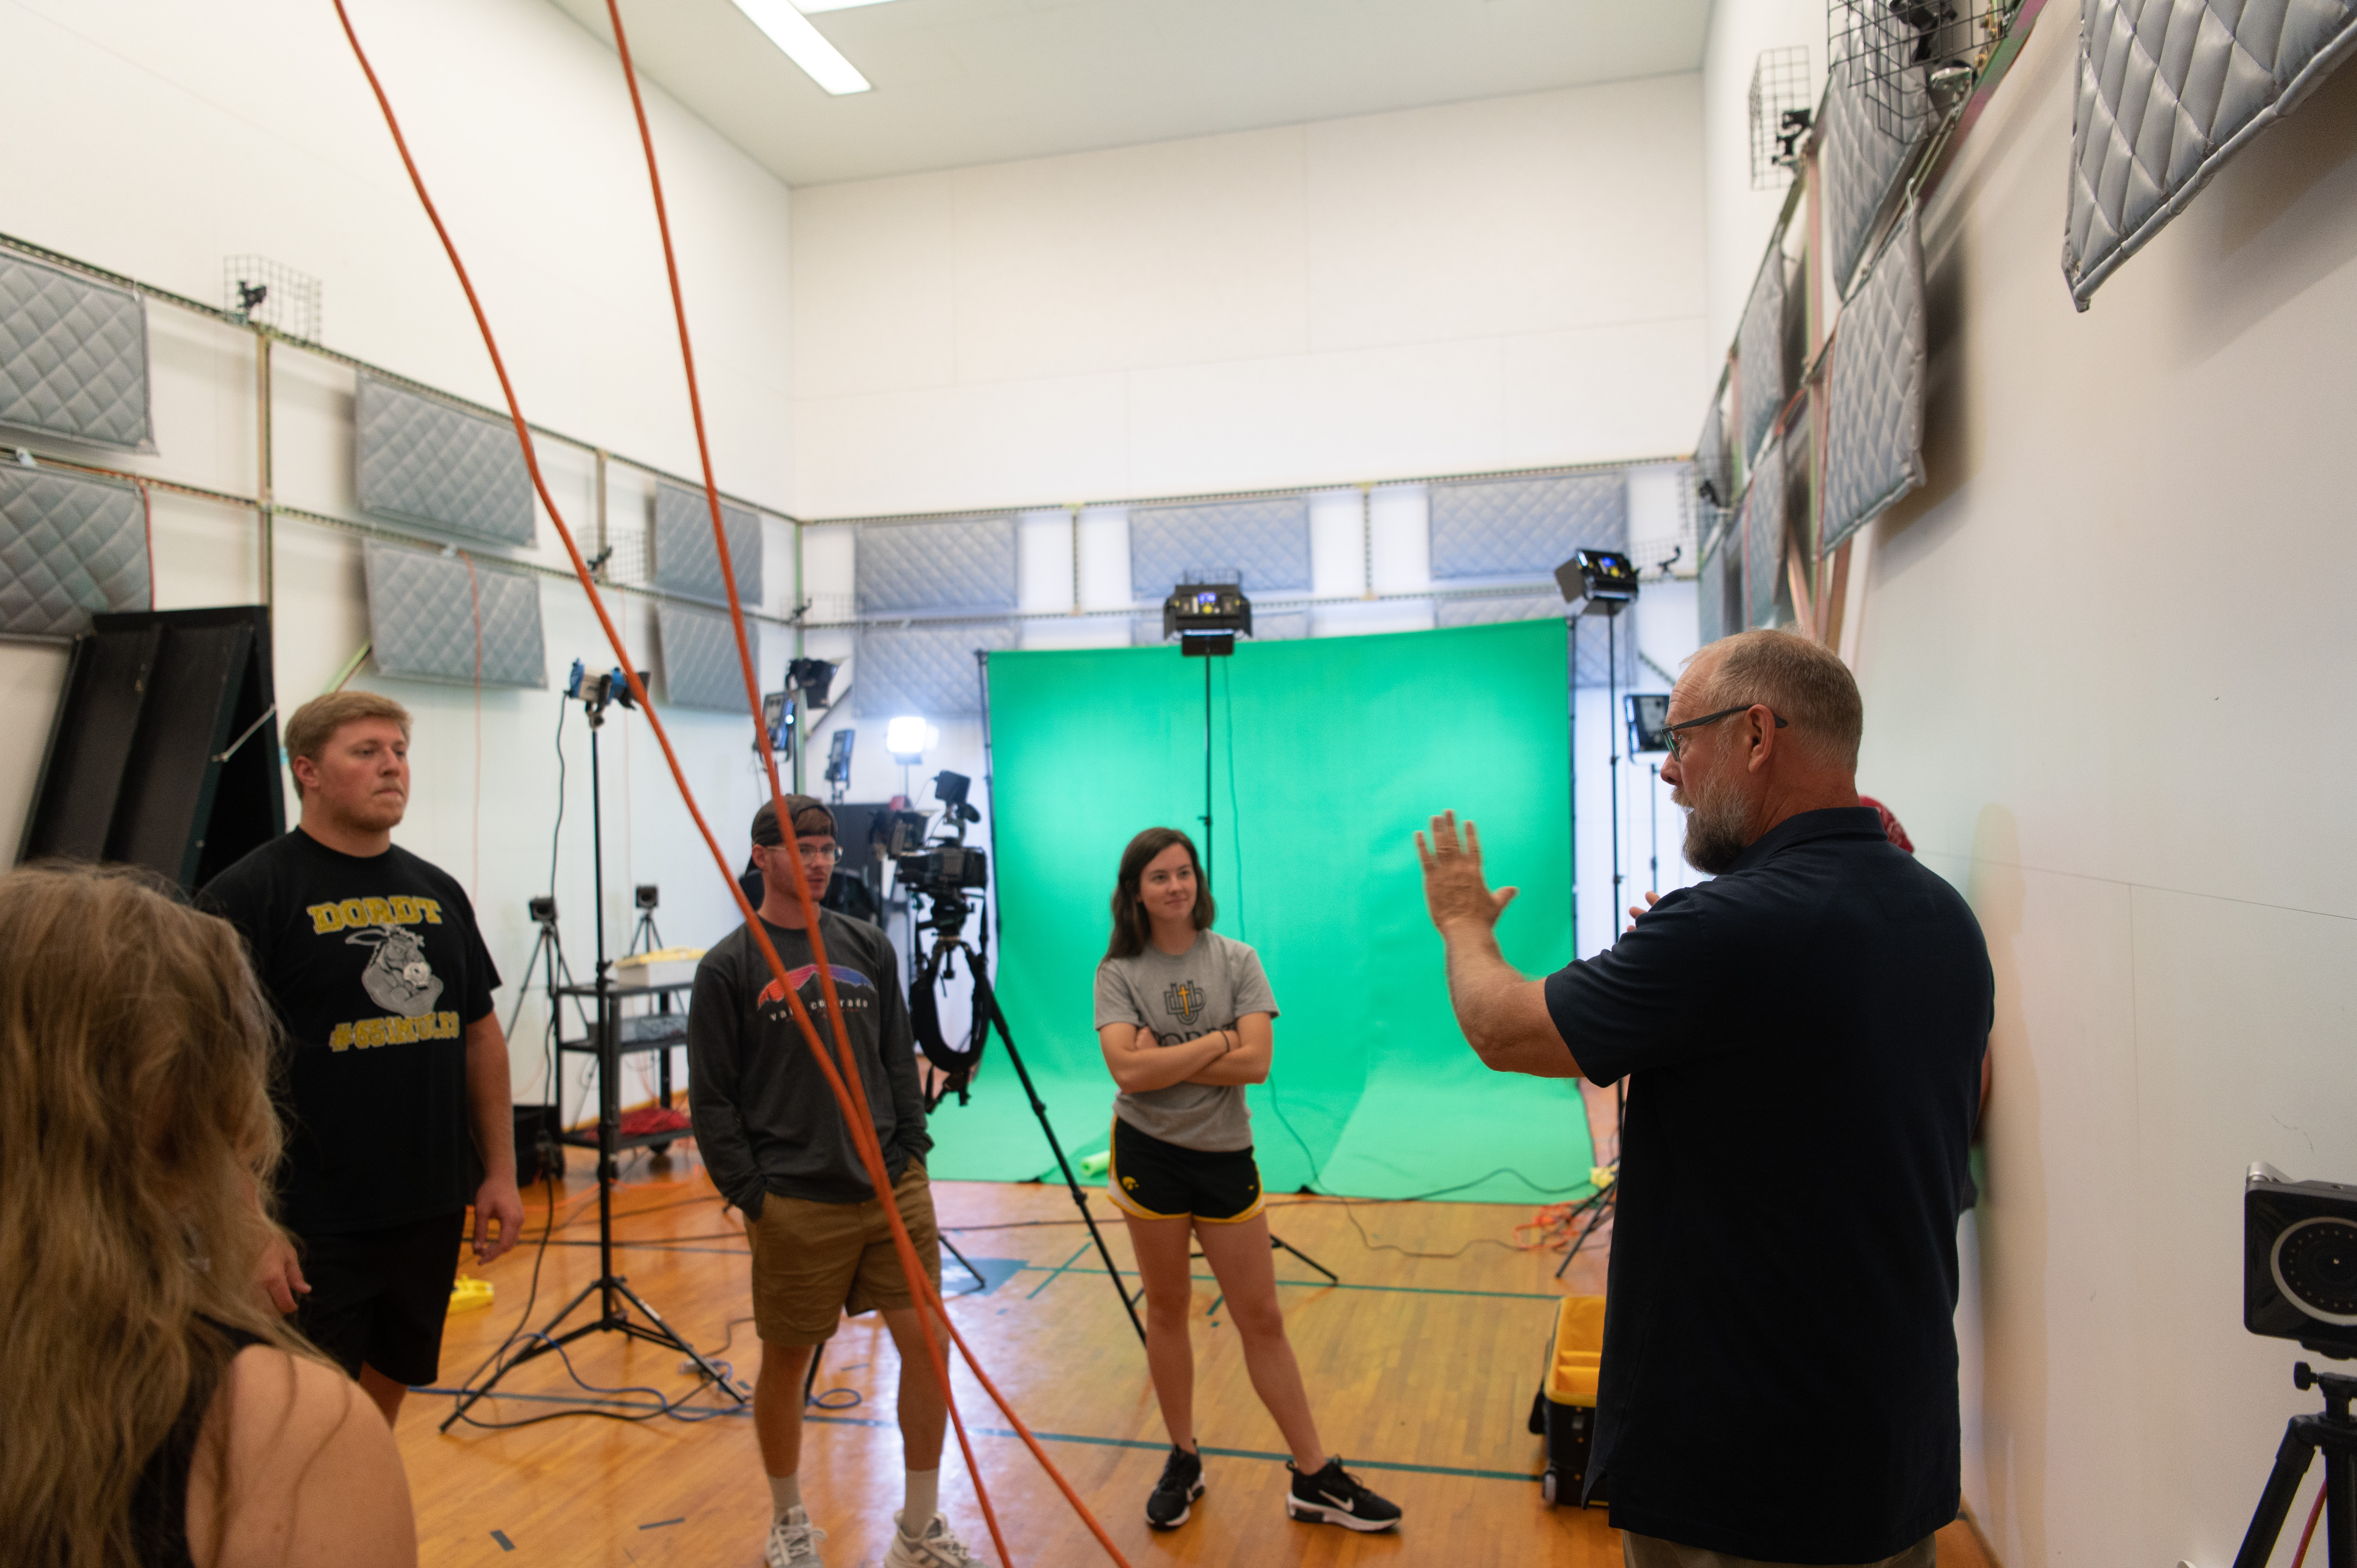 Students learn how to film